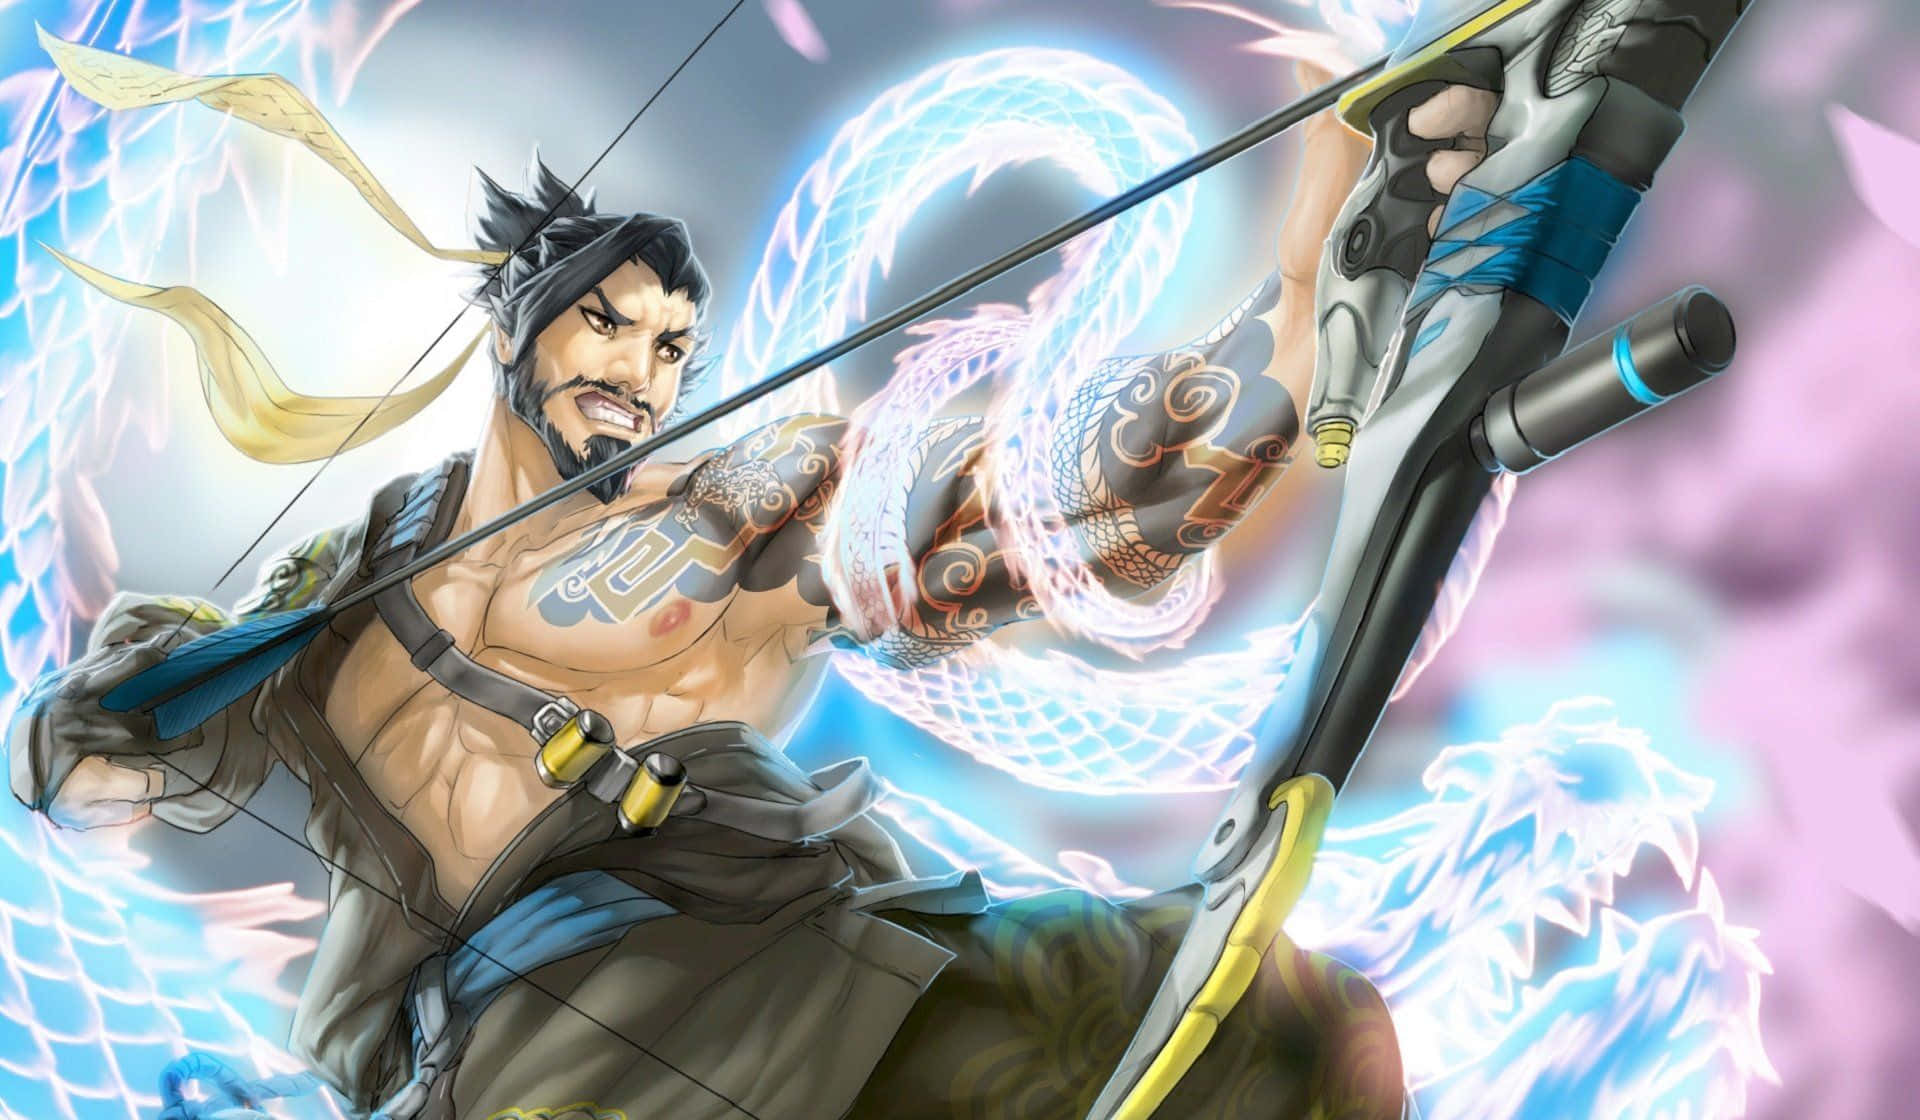 Hanzo archer unleashes his signature attack in Overwatch Wallpaper